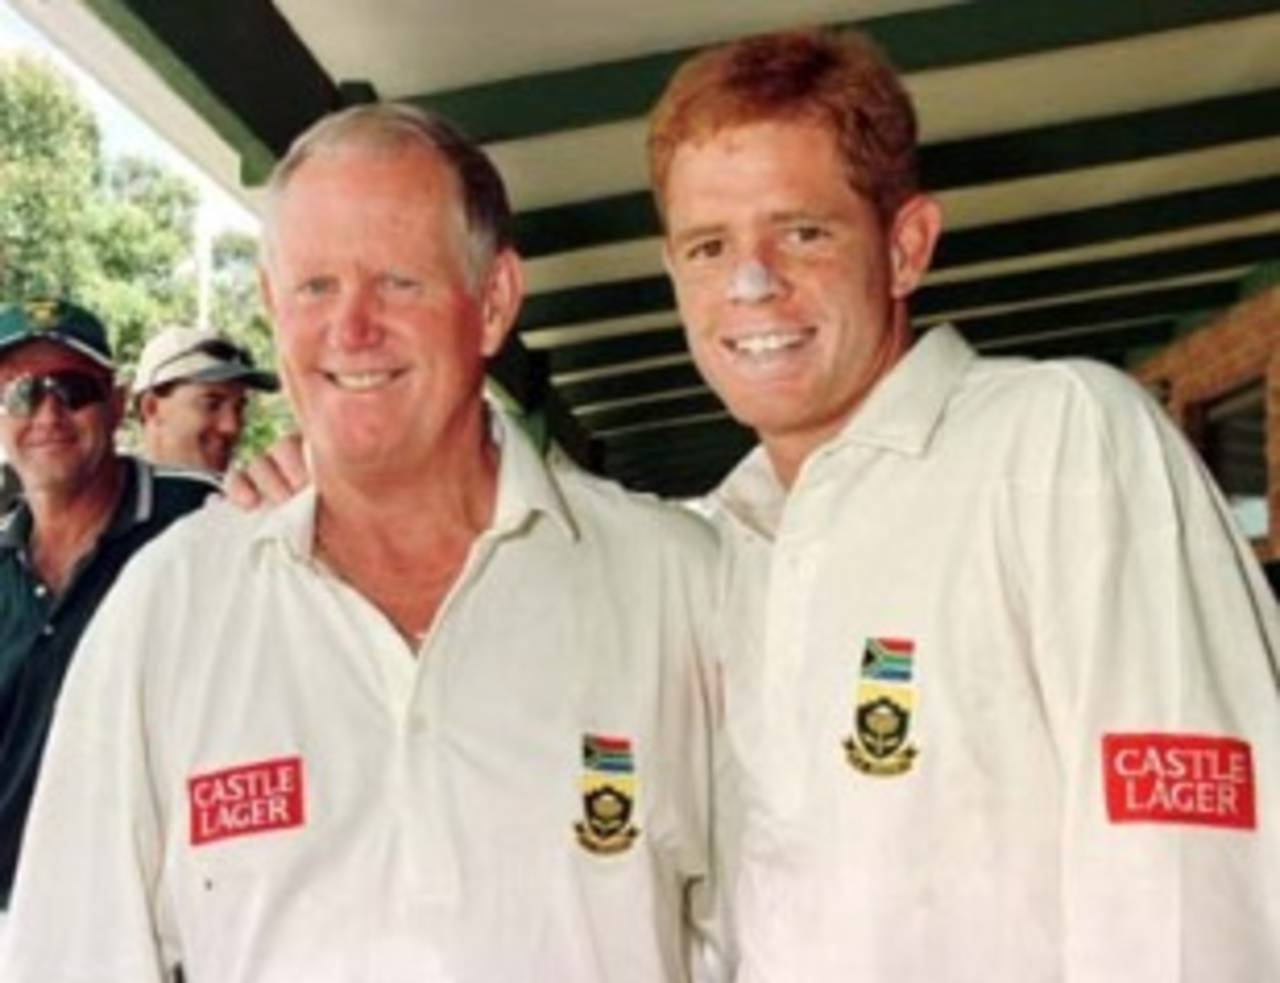 Graeme and Shaun Pollock smile before the game. South Africa v Chairman's XI at Lilac Hill, Perth, November 25th 1997